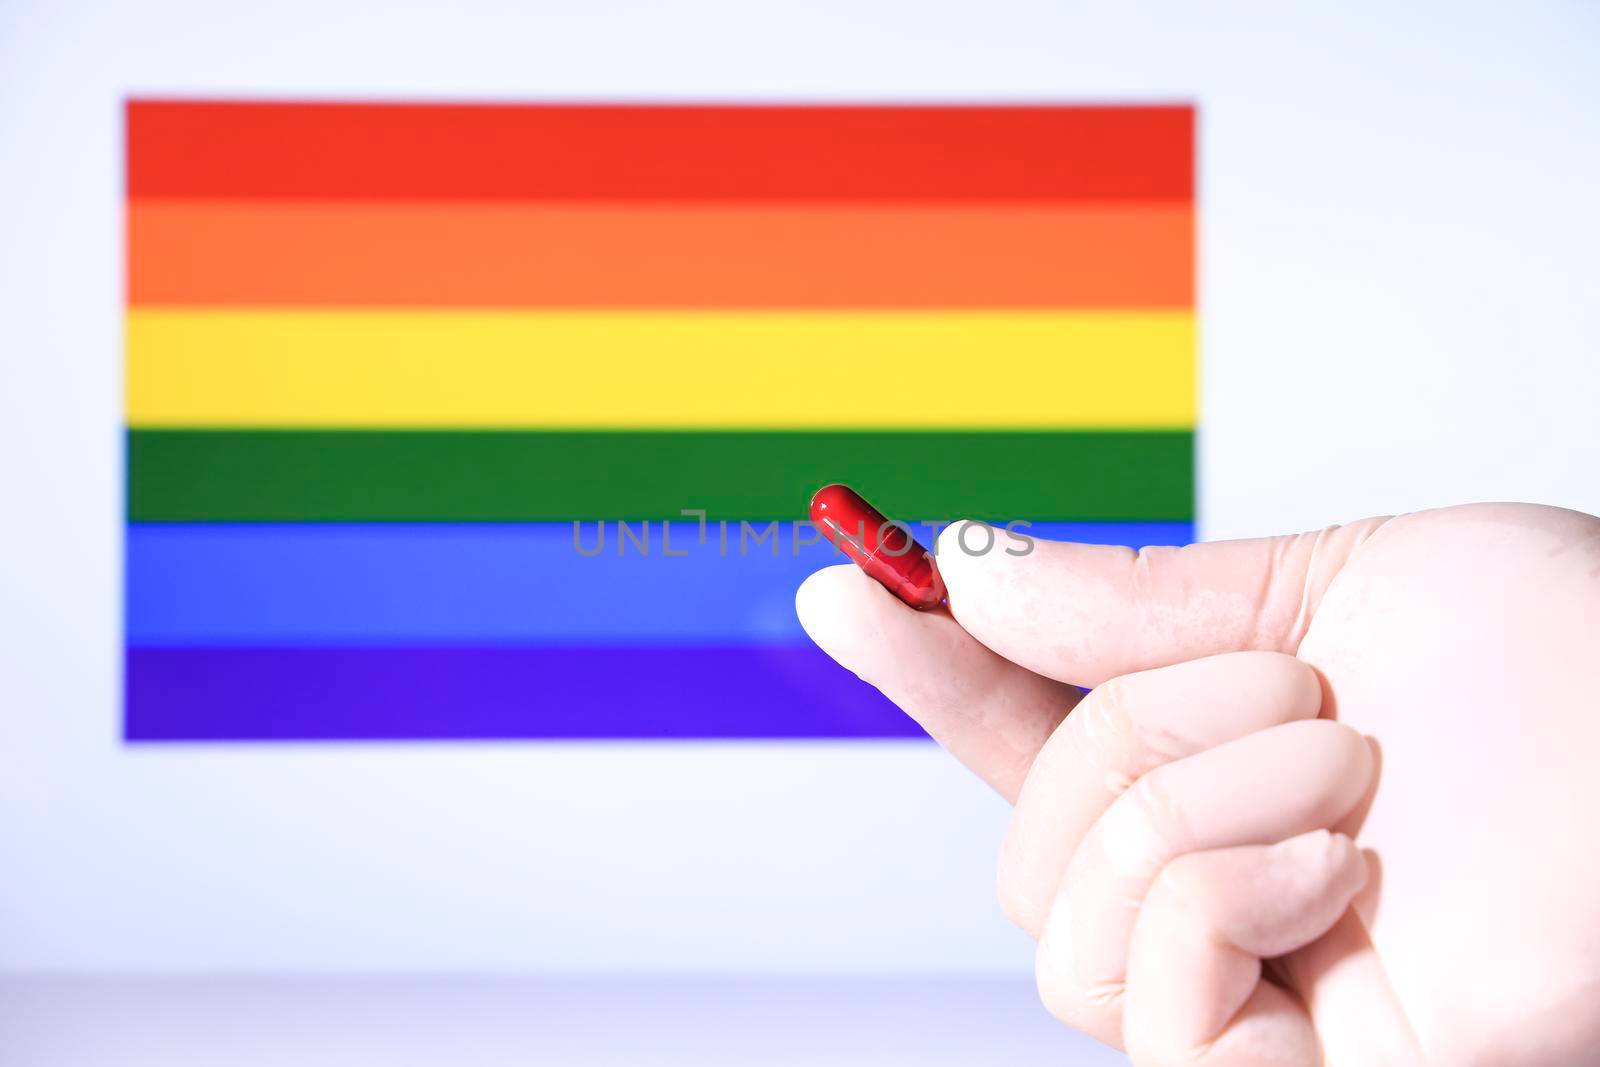 Hand in surgical glove holding red capsule and rainbow flag in the background